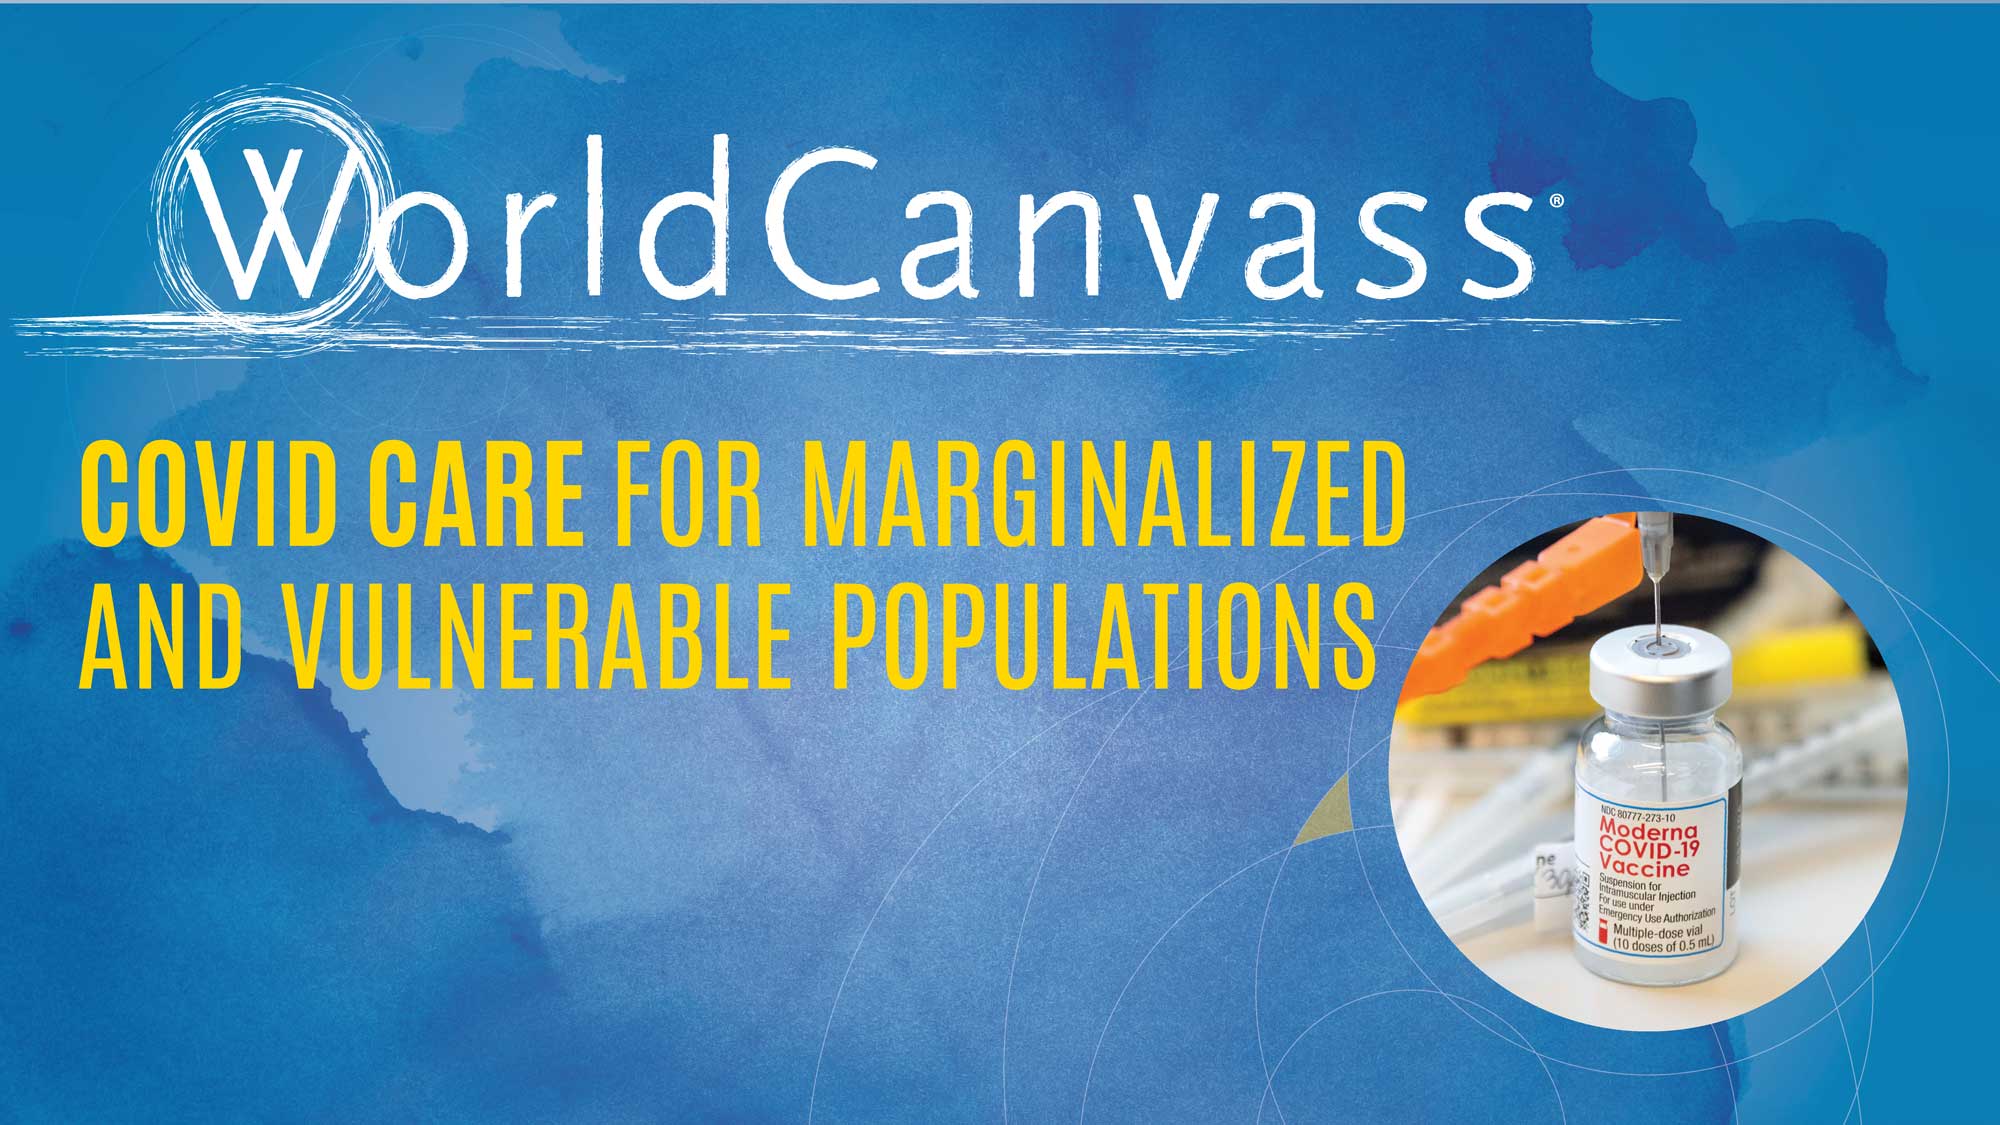 WorldCanvass - COVID Care for Marginalized and Vulnerable Populations